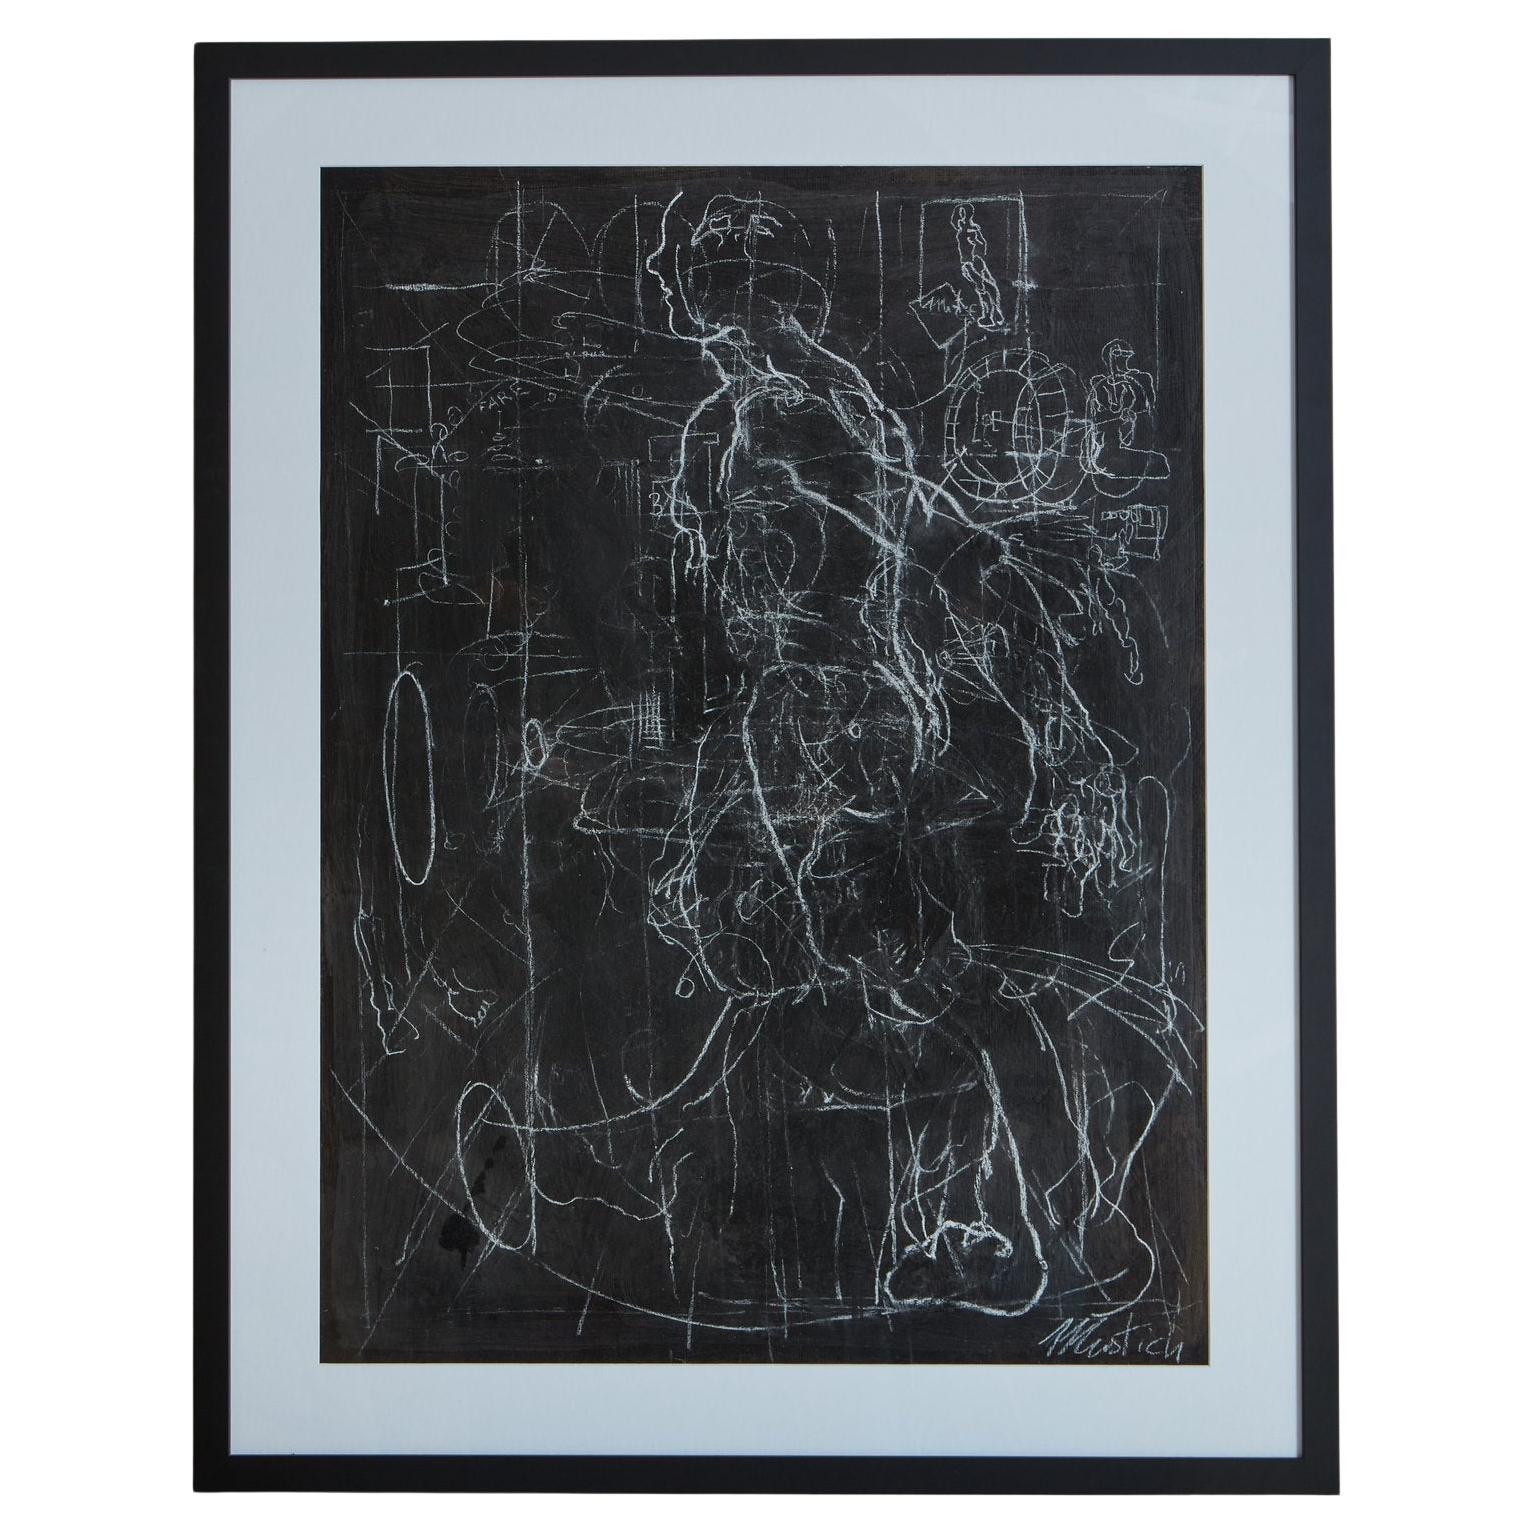 Framed Mixed Media Abstract on Paper #5 by Giancarlo Mustich